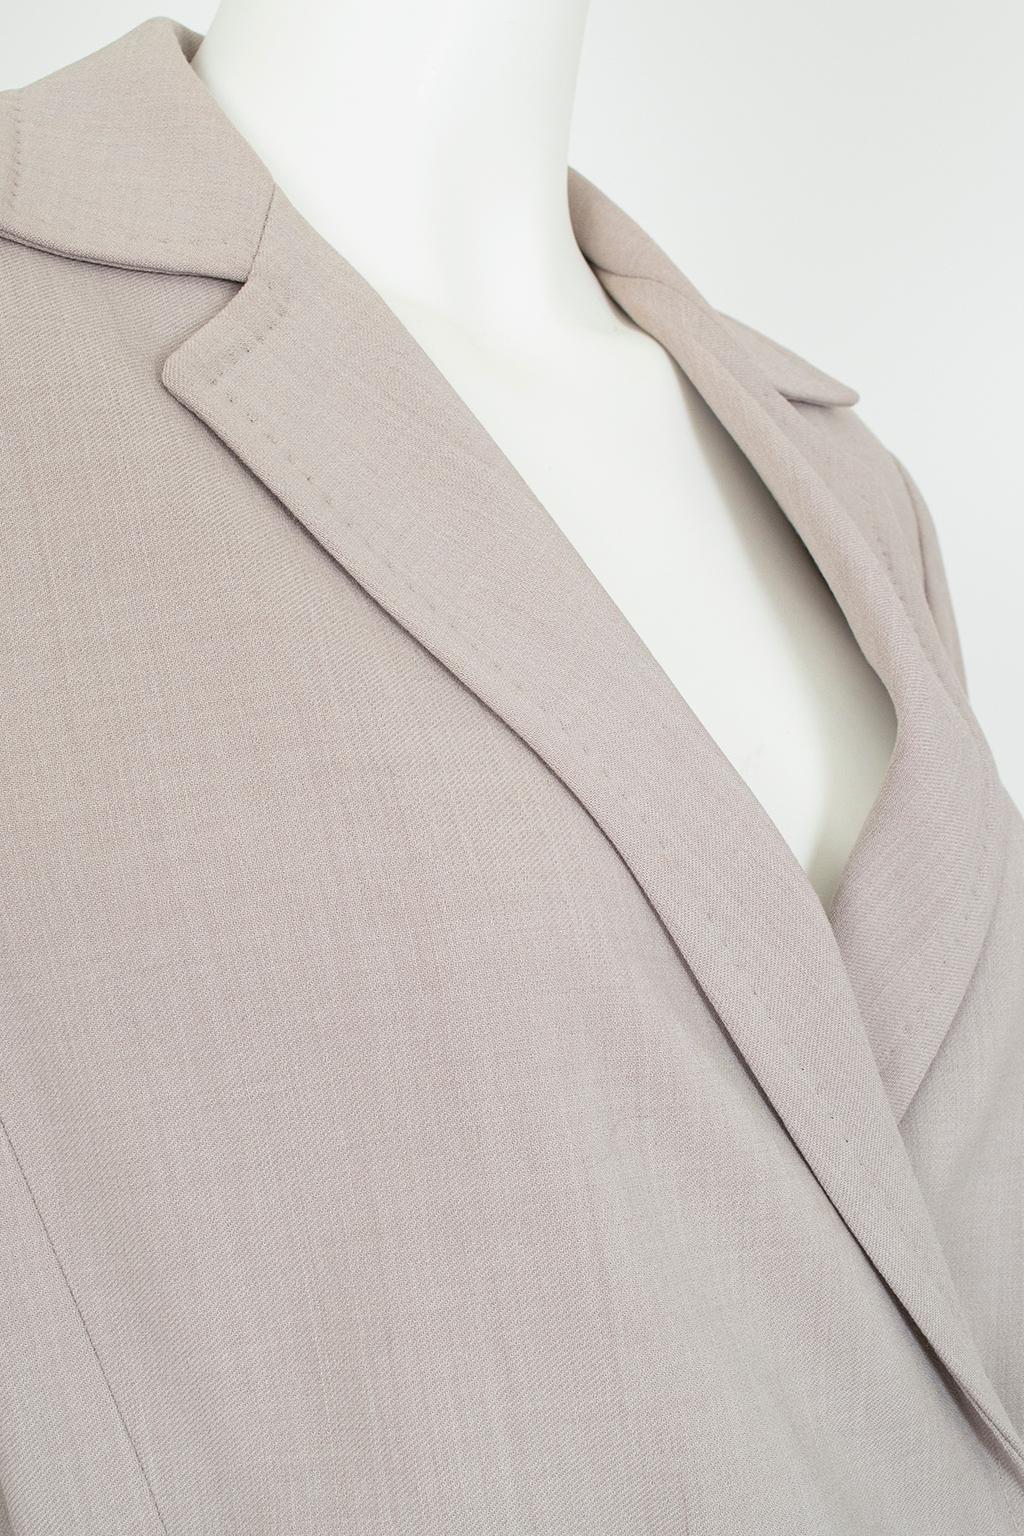 Max Mara Taupe Wool and Silk Crêpe Belted Pant Suit - It 40 – 42, 1990s For Sale 2